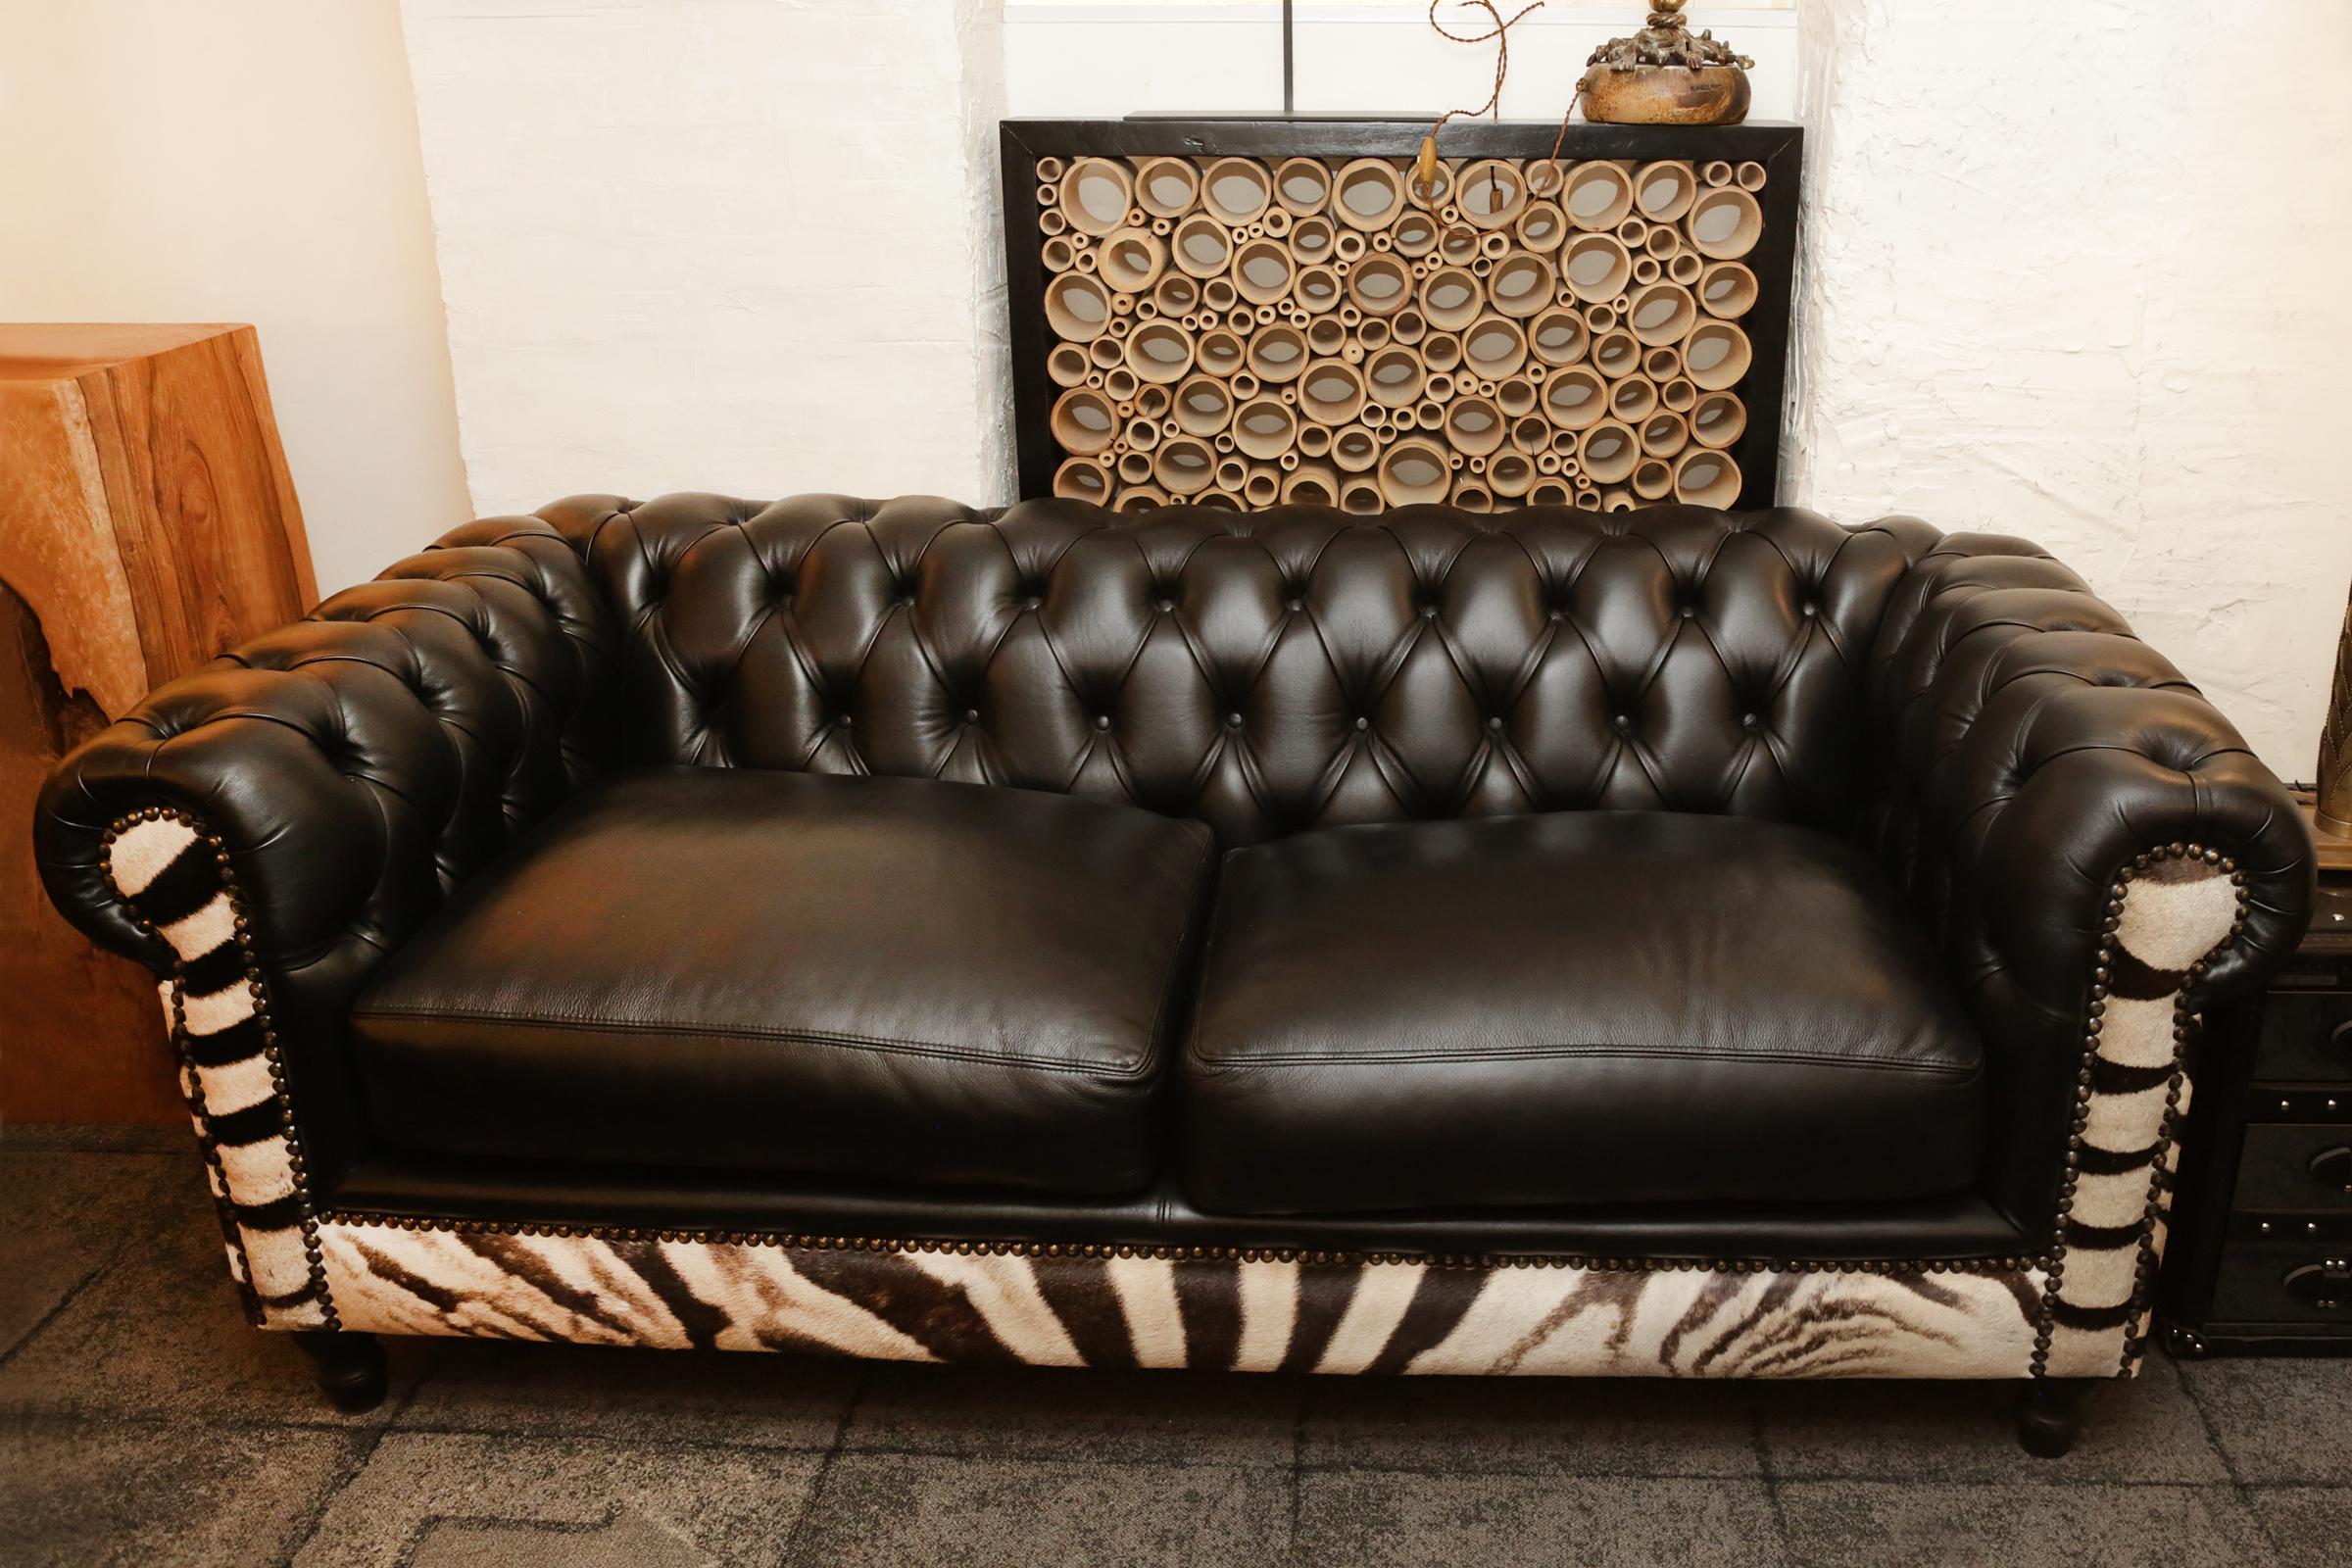 Sofa zebra with real south Africa zebra skin,
handcrafted work with black genuine leather.
Exceptional and unique piece made in France.